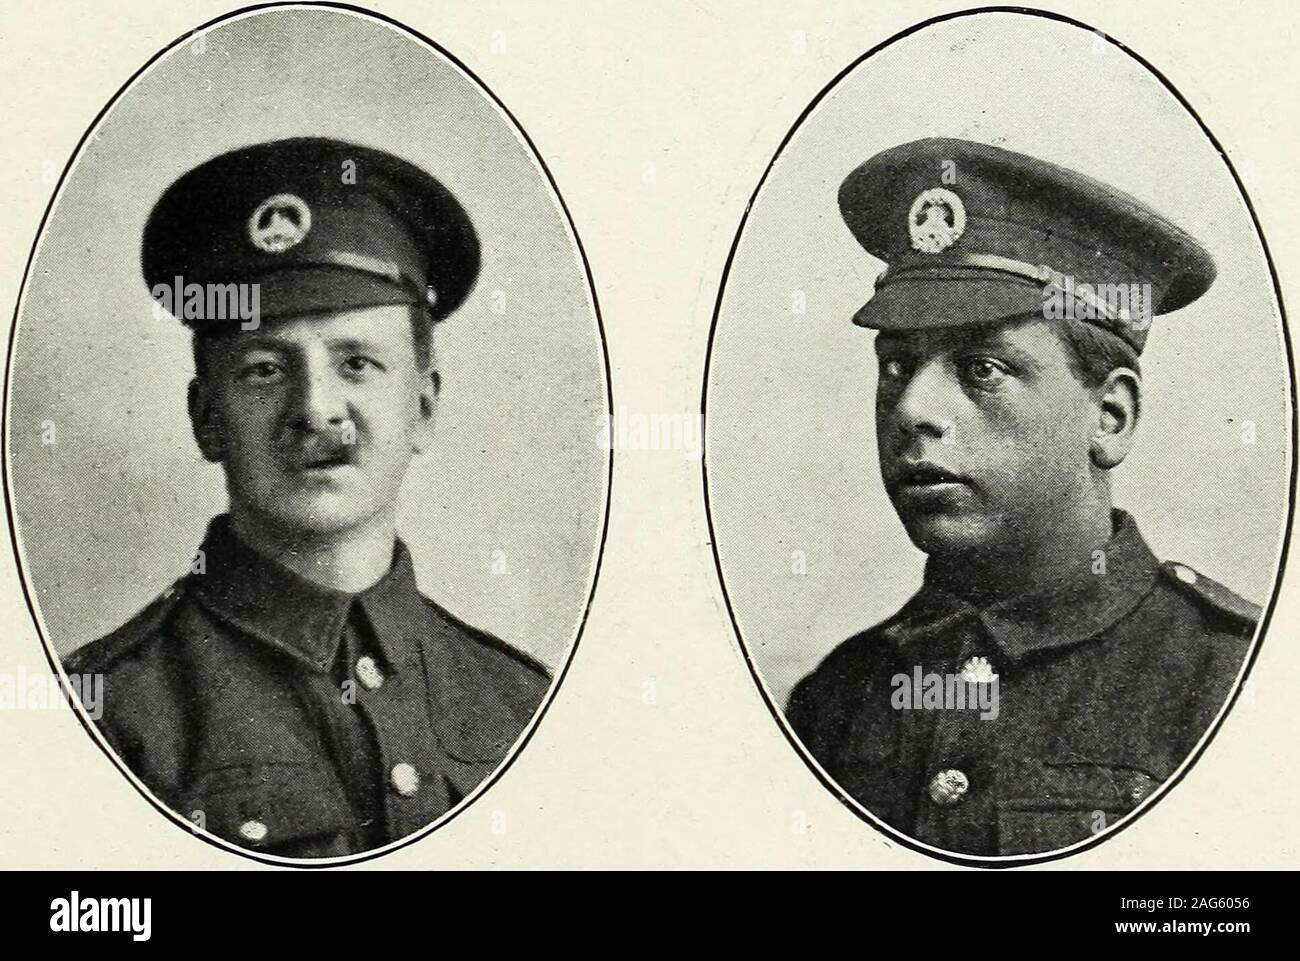 . Record of partners, staff and operatives who participated in the Great War, 1914-1919. Cpl. J. H. FROGGATT.Royal Army Medical Corps, Pte. A. H. SYKES.East Yorkshire Regiment.. Pte. THOS. MOSS.4th Monmouthshire Regiment. Pte. THOS. BUTTON BARTON.4th Manchester Regiment. ManchesterOperatives yA^vA^gw^wA^^(c Pte. J. W. ARDRON.Royal Army Service Corps. })}^A)UJ^J^)UVUk)^ Stock Photo